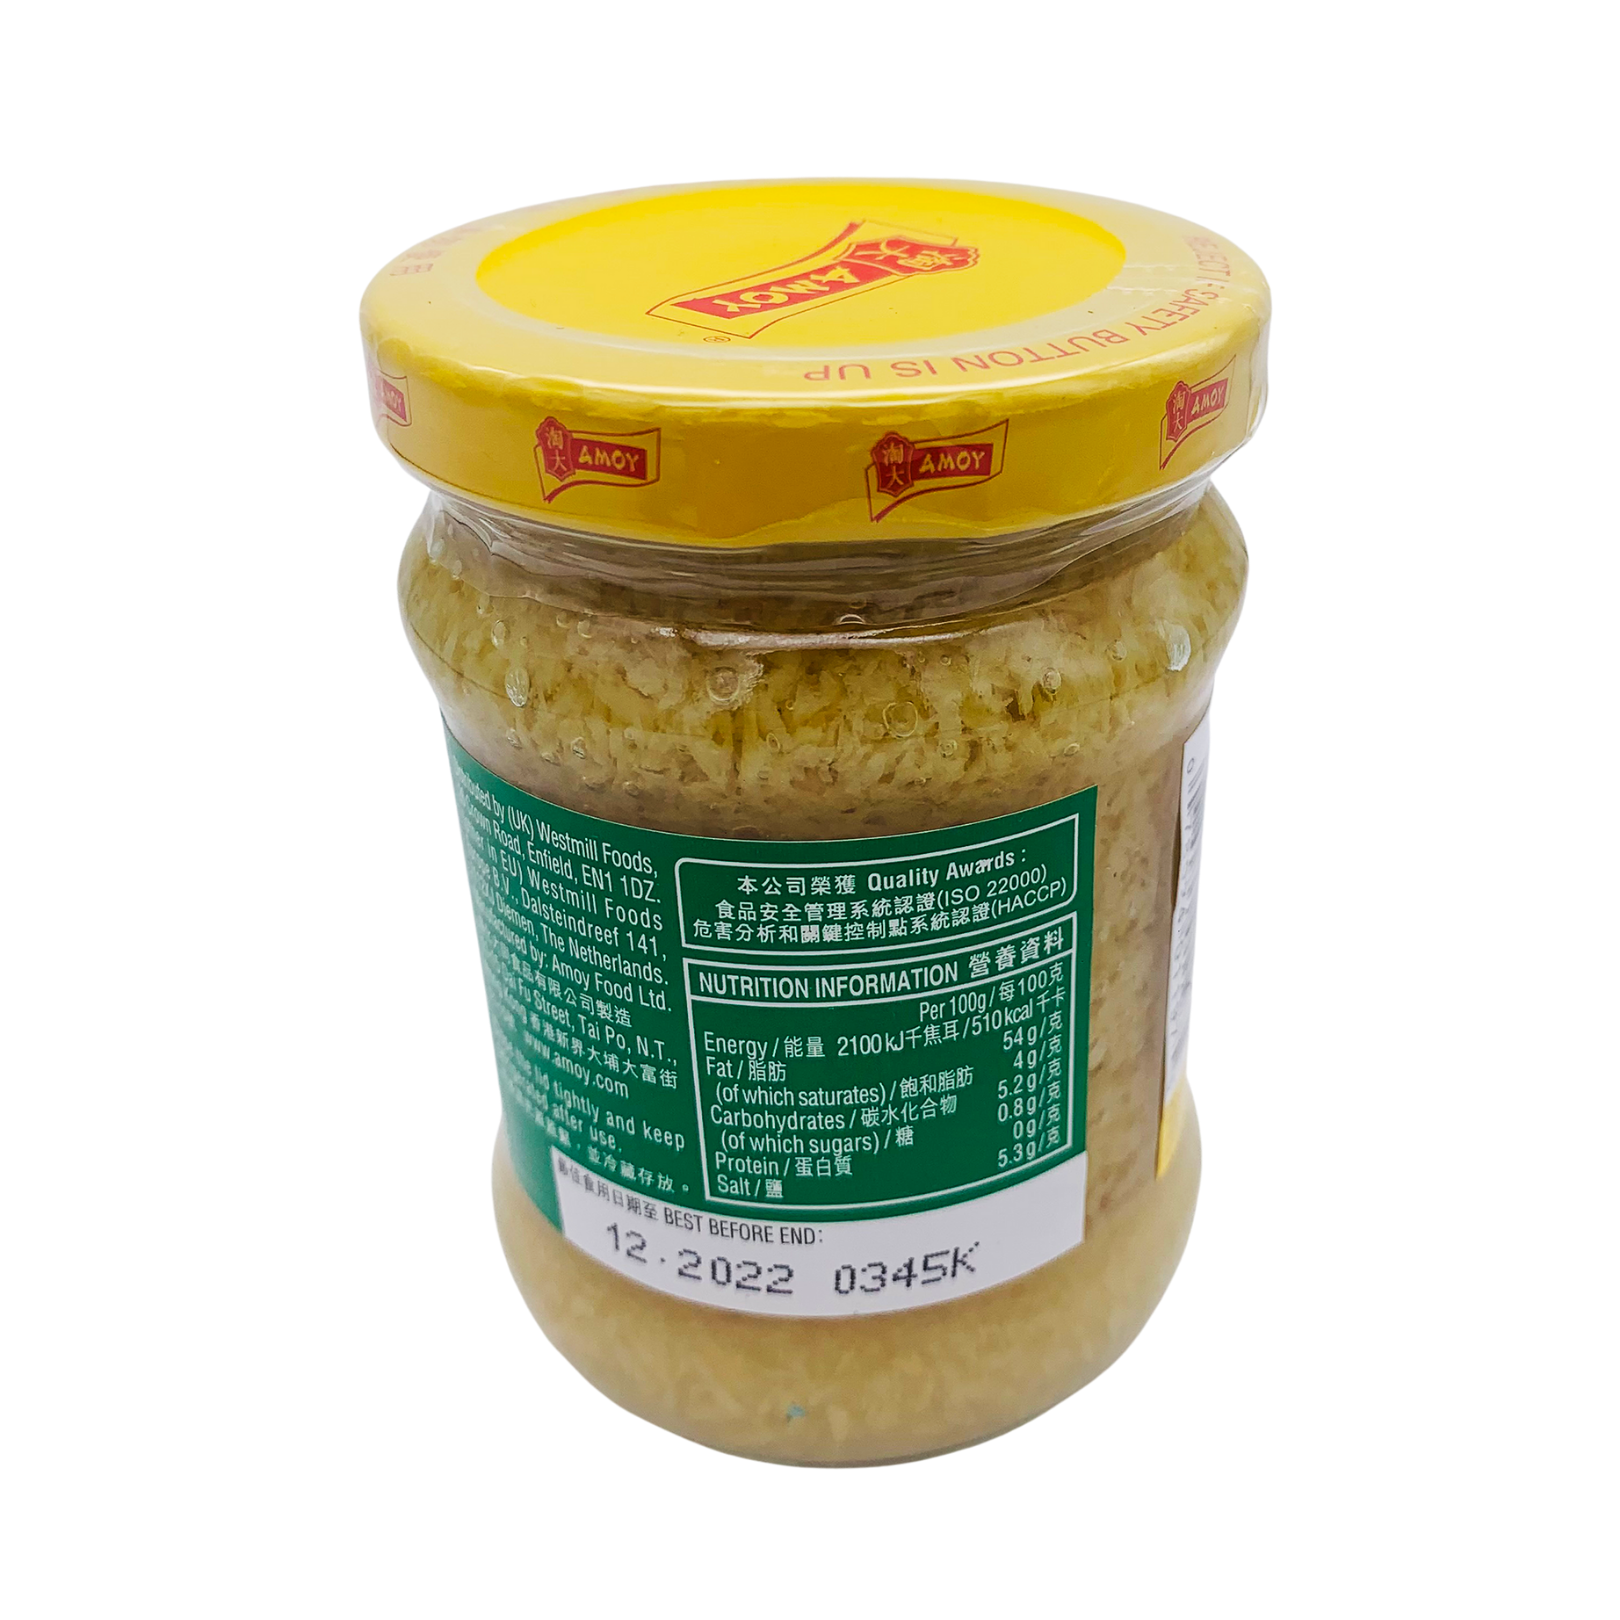 Asian Minced Ginger with Shallot Oil 200g by Amoy